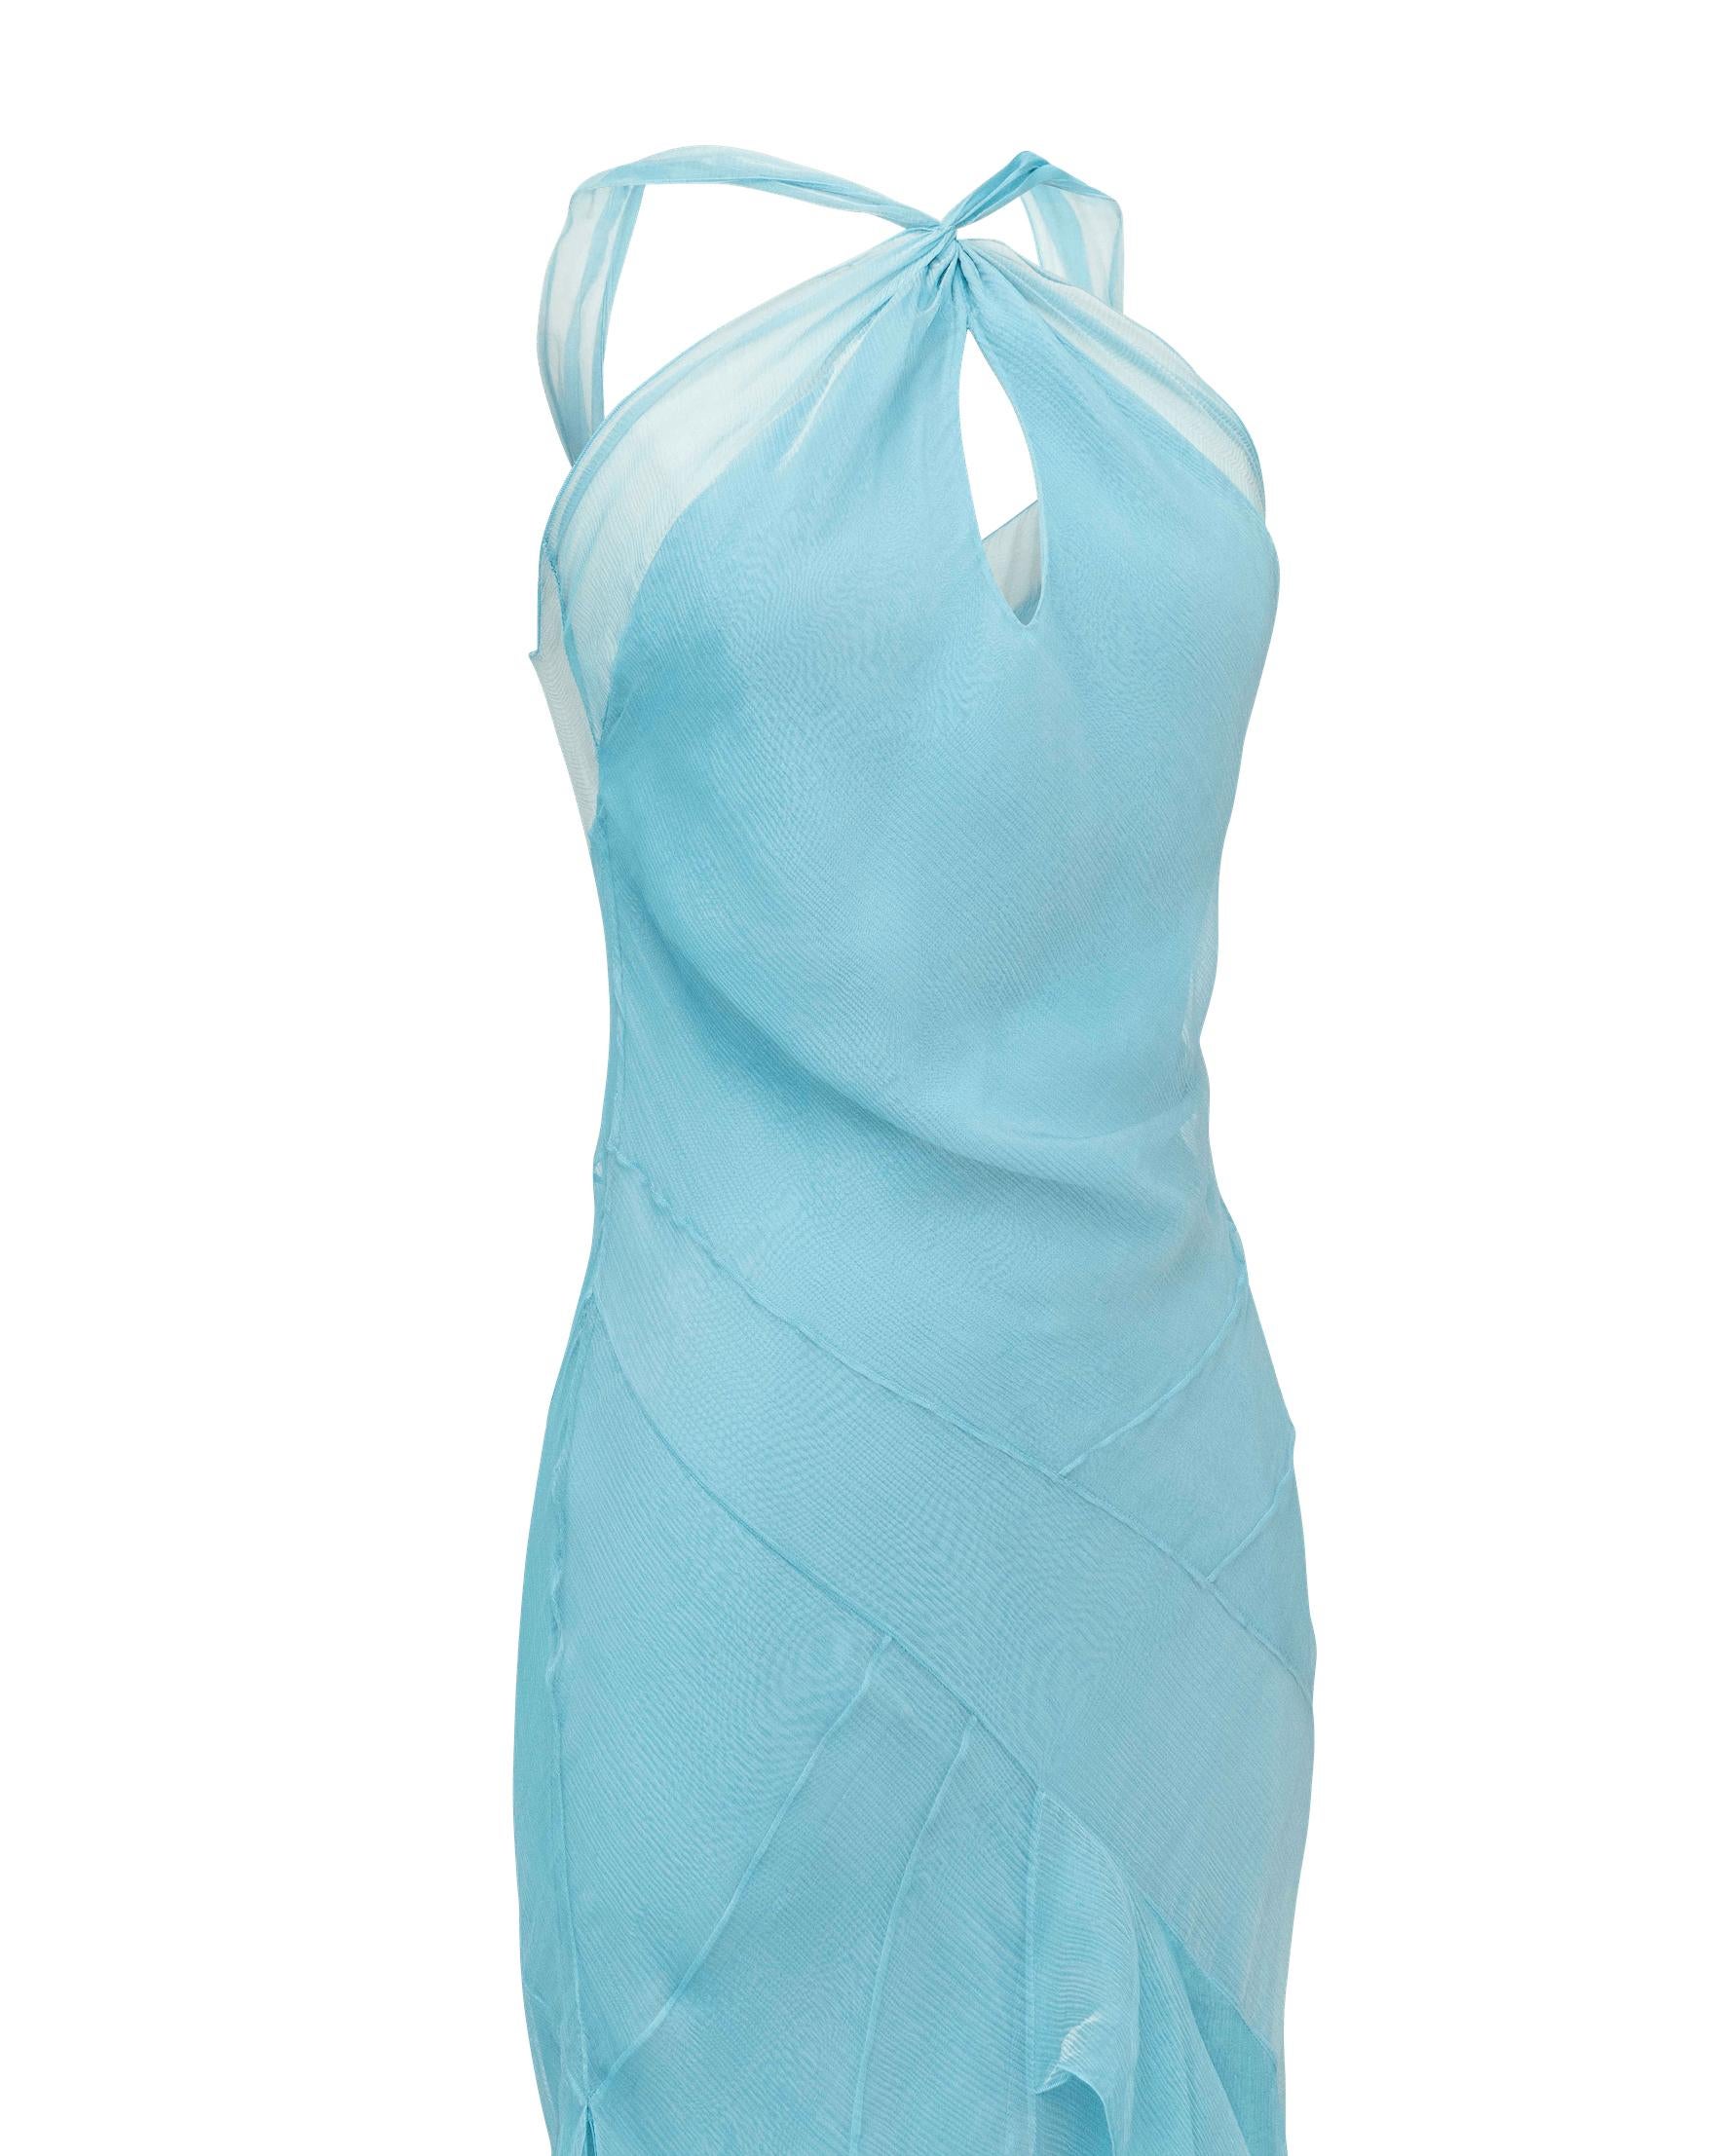 c. 2004 Christian Dior by John Galliano Baby Blue Silk Chiffon Gown In Good Condition In North Hollywood, CA